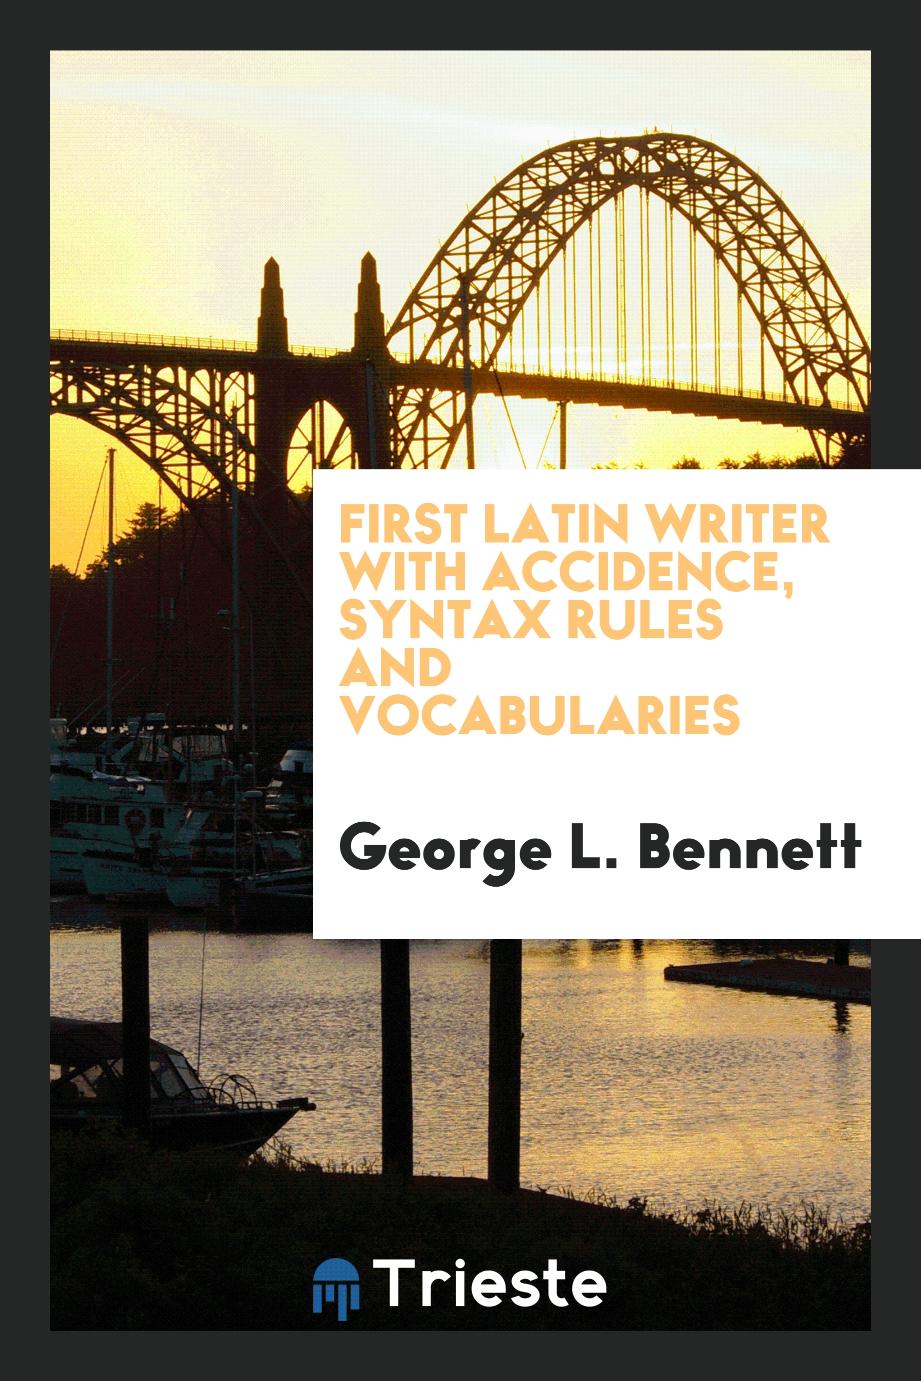 First Latin writer with accidence, syntax rules and vocabularies